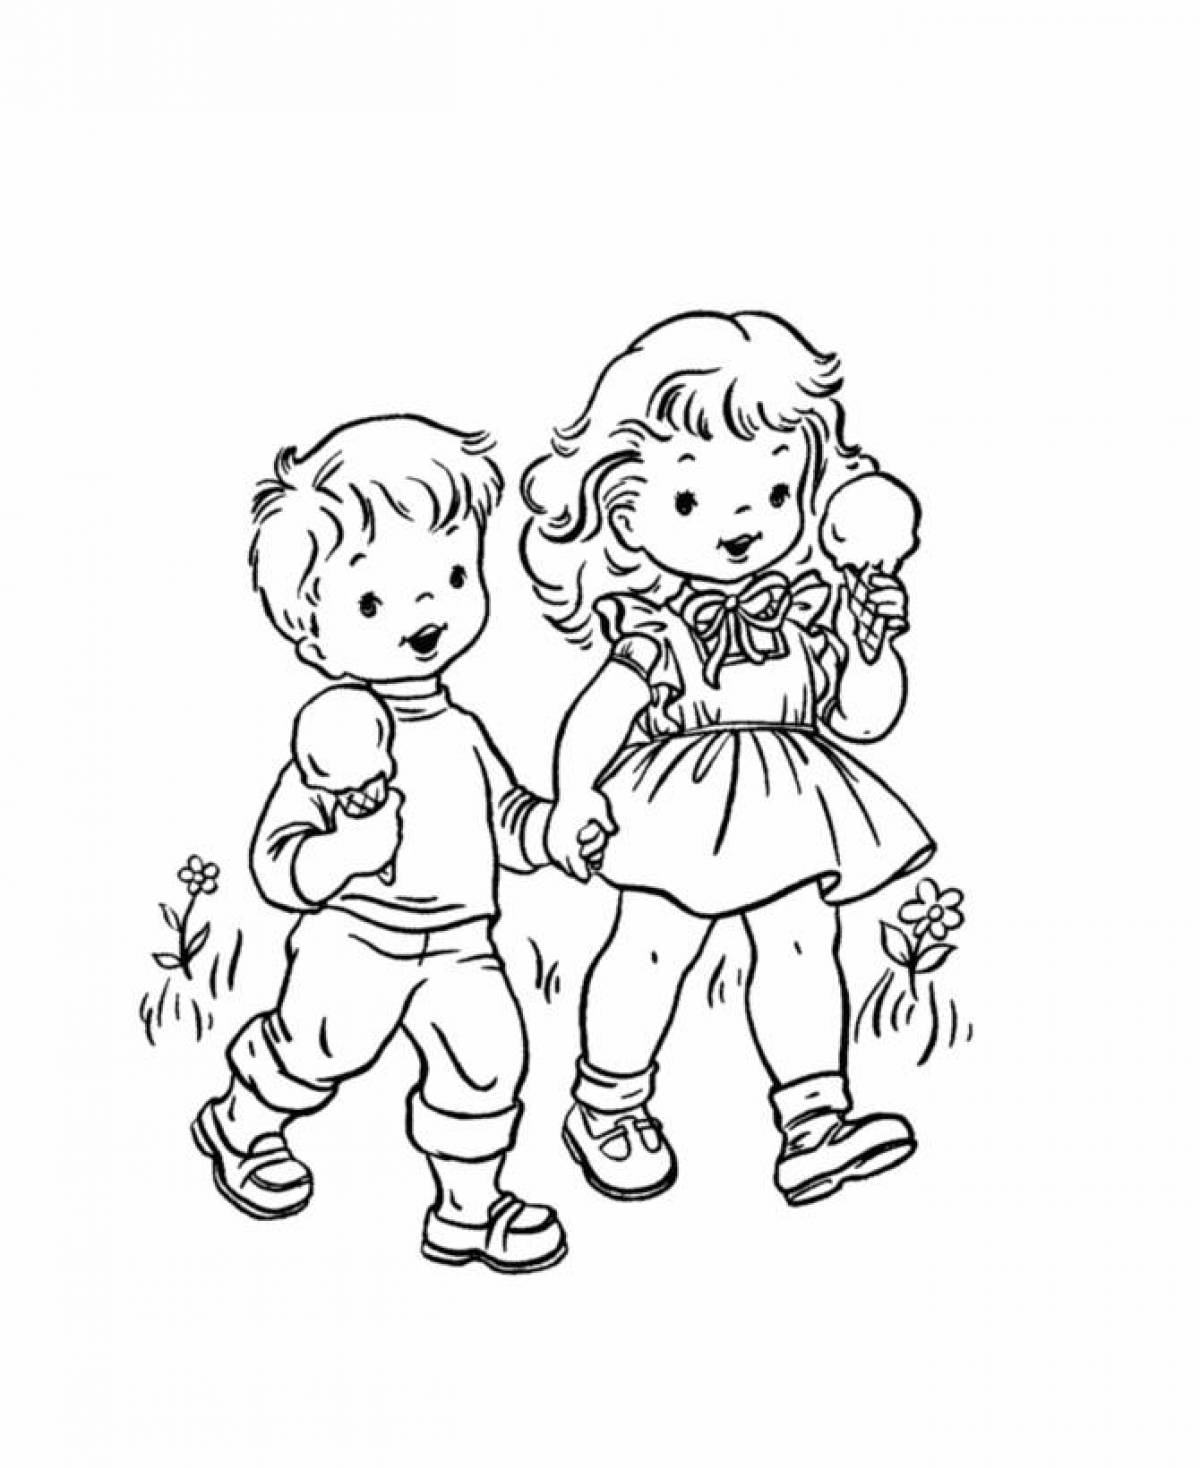 Girl and boy with ice cream